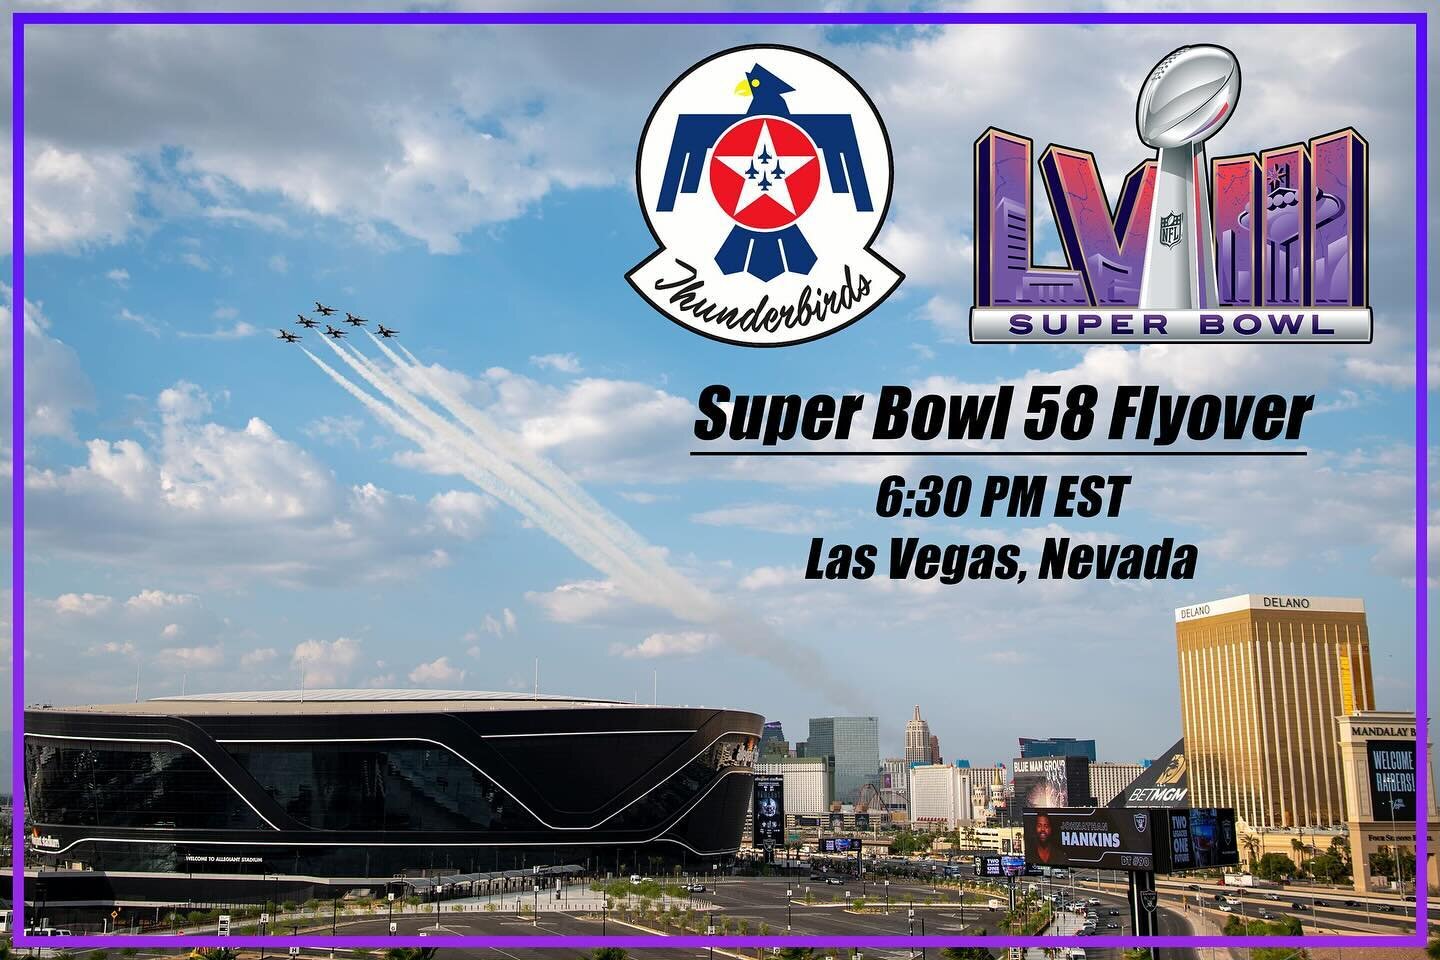 Six jets, three teams, one game.

The U.S. Air Force Thunderbirds will take to the skies over Las Vegas later today to kick off Super Bowl LVIII, marking the first public appearance for the 2024 team.